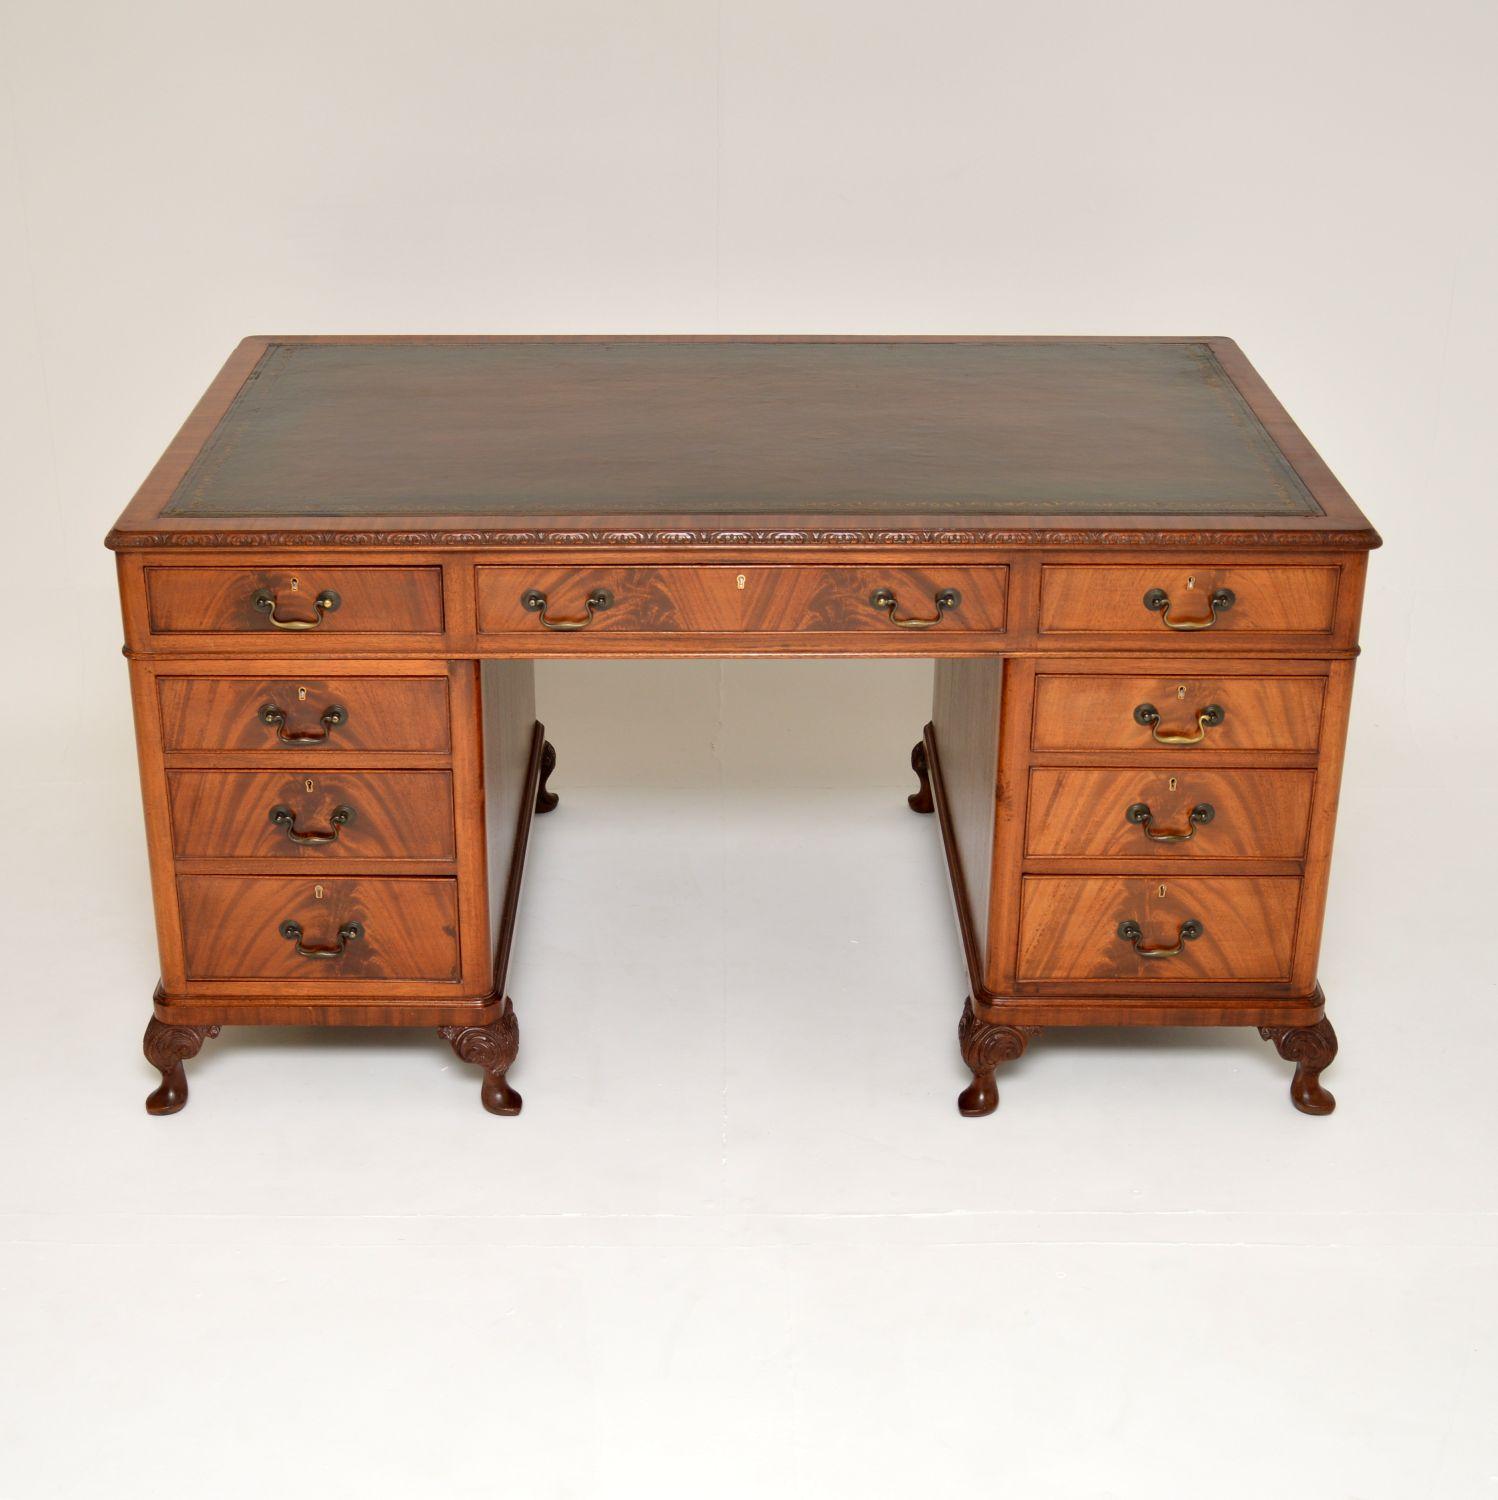 An excellent large antique pedestal desk. This was made in England, it dates from around the 1920-30’s.

The quality is fantastic and this is a great size. The wood has beautiful grain patterns, and fine carving around the top edges and cabriole